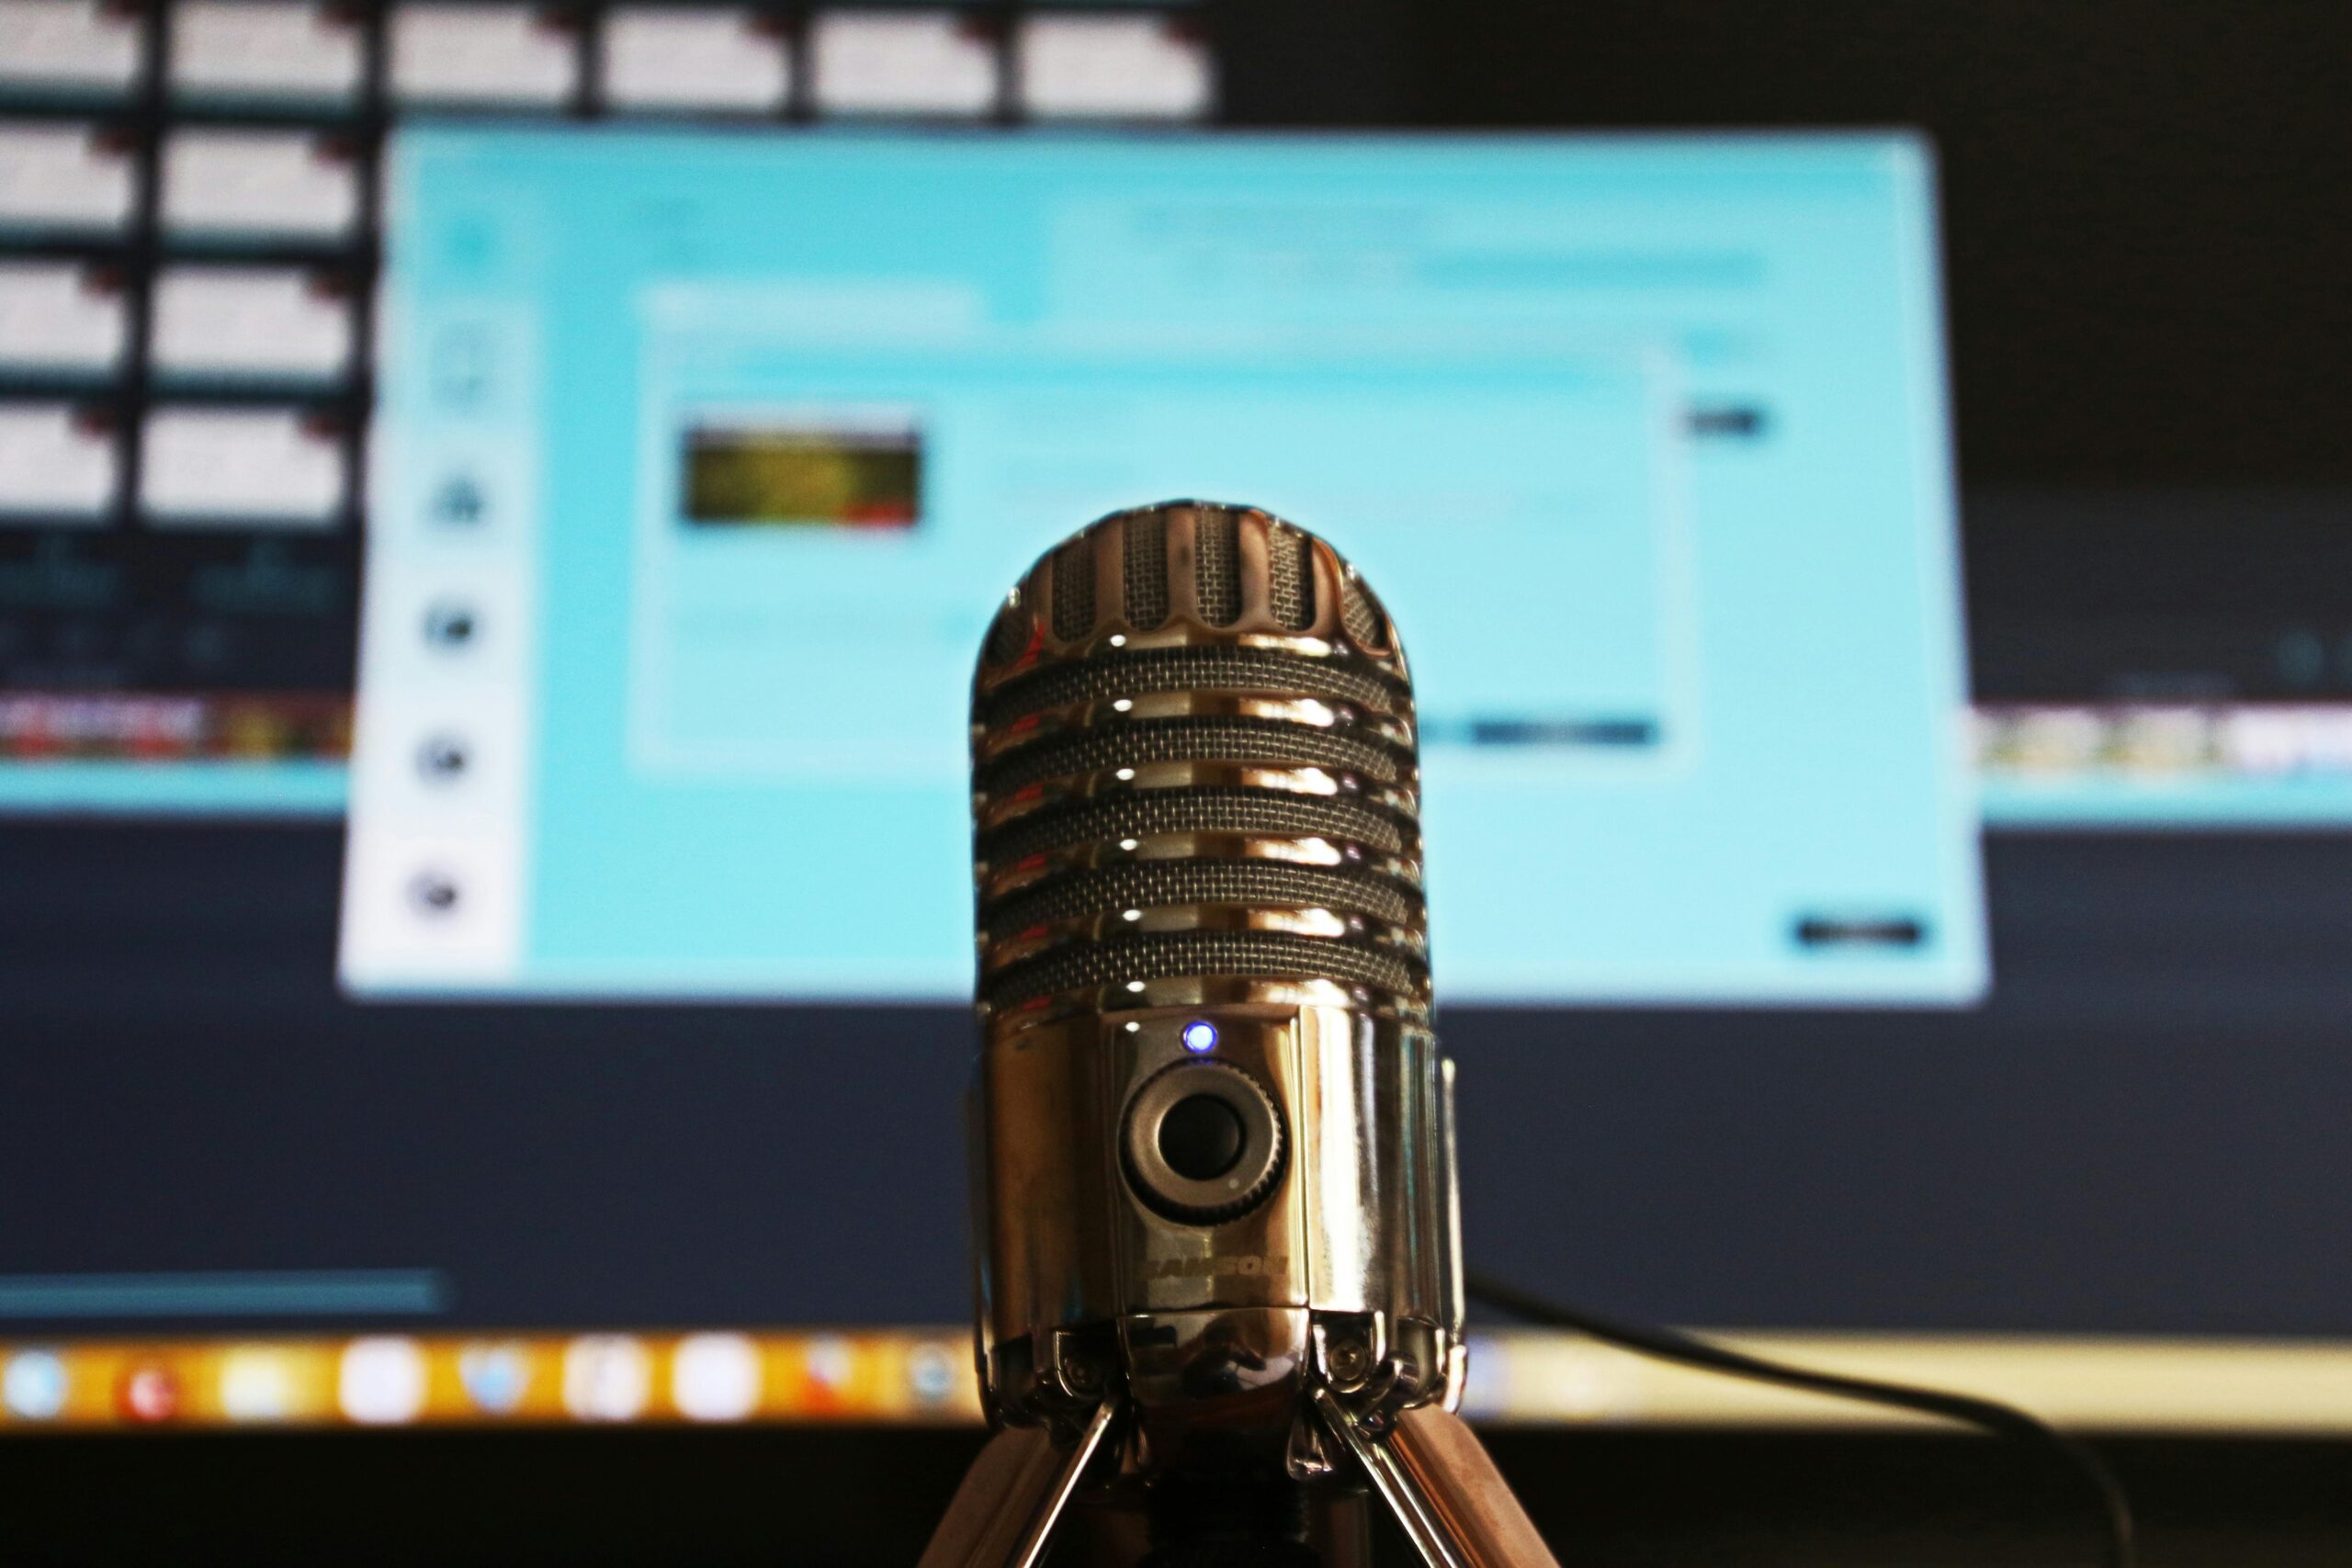 Image of a microphone and computer screen.